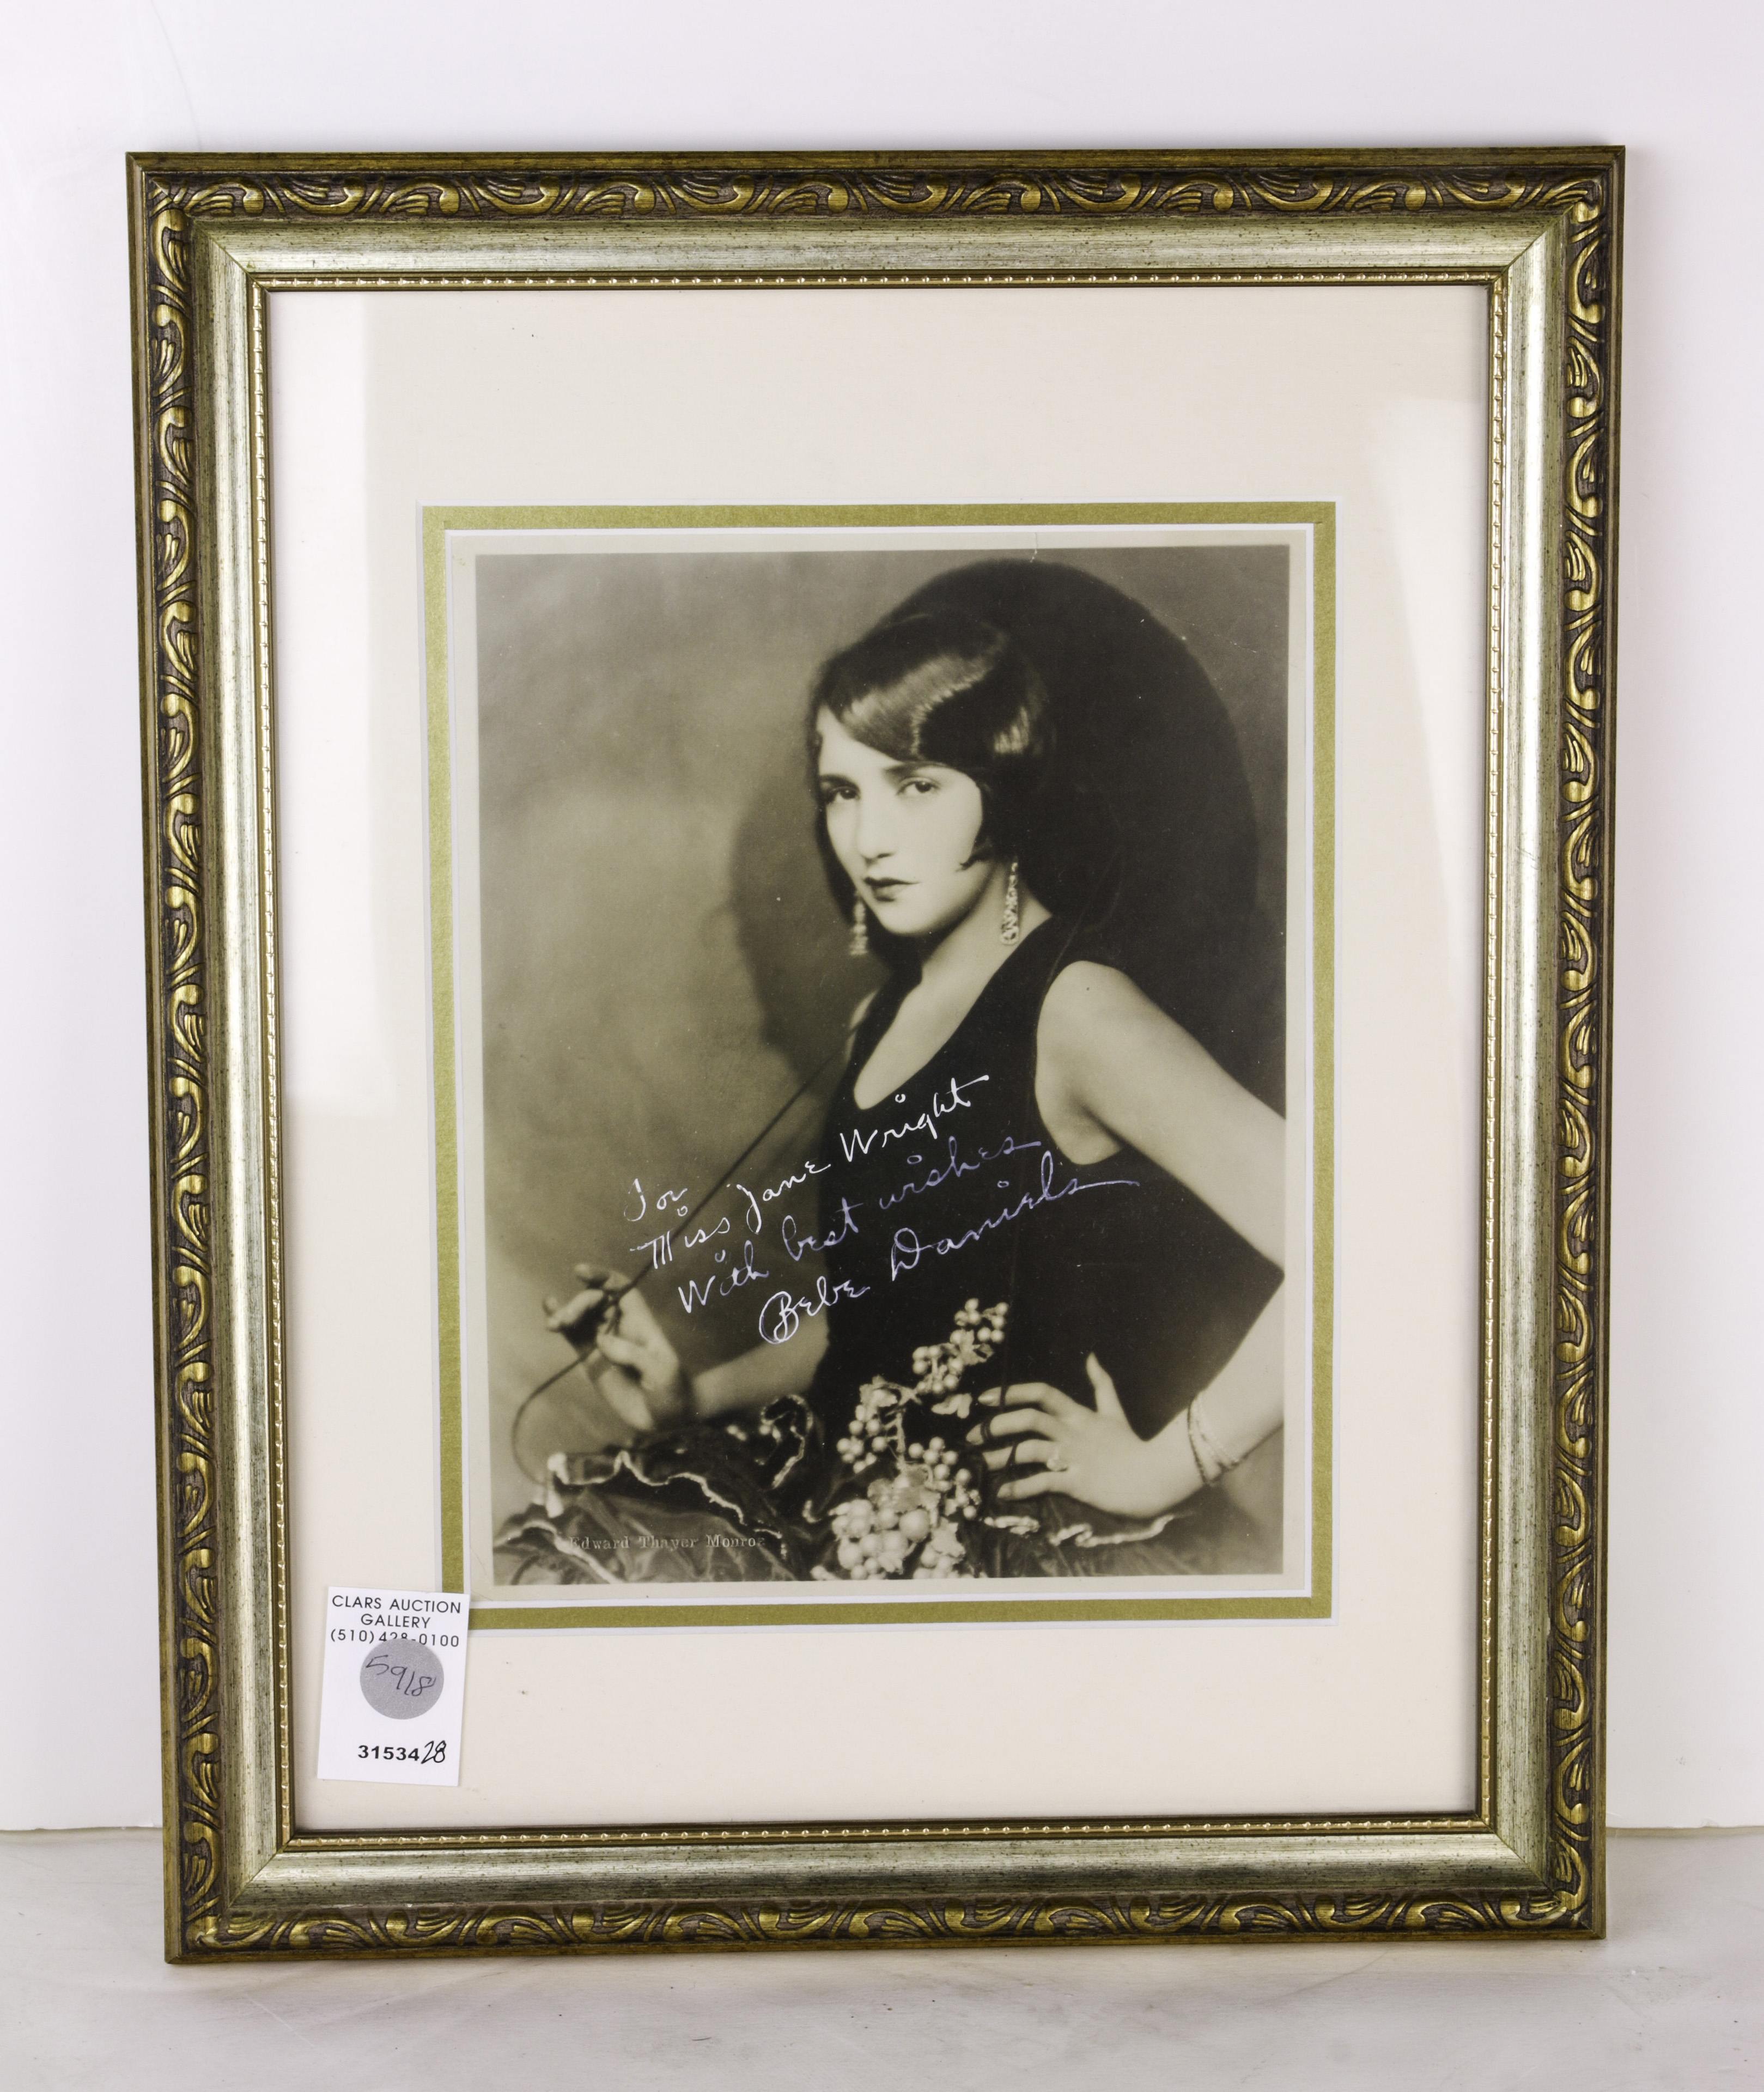 A SIGNED BEBE DANIELS PHOTOGRAPH A signed